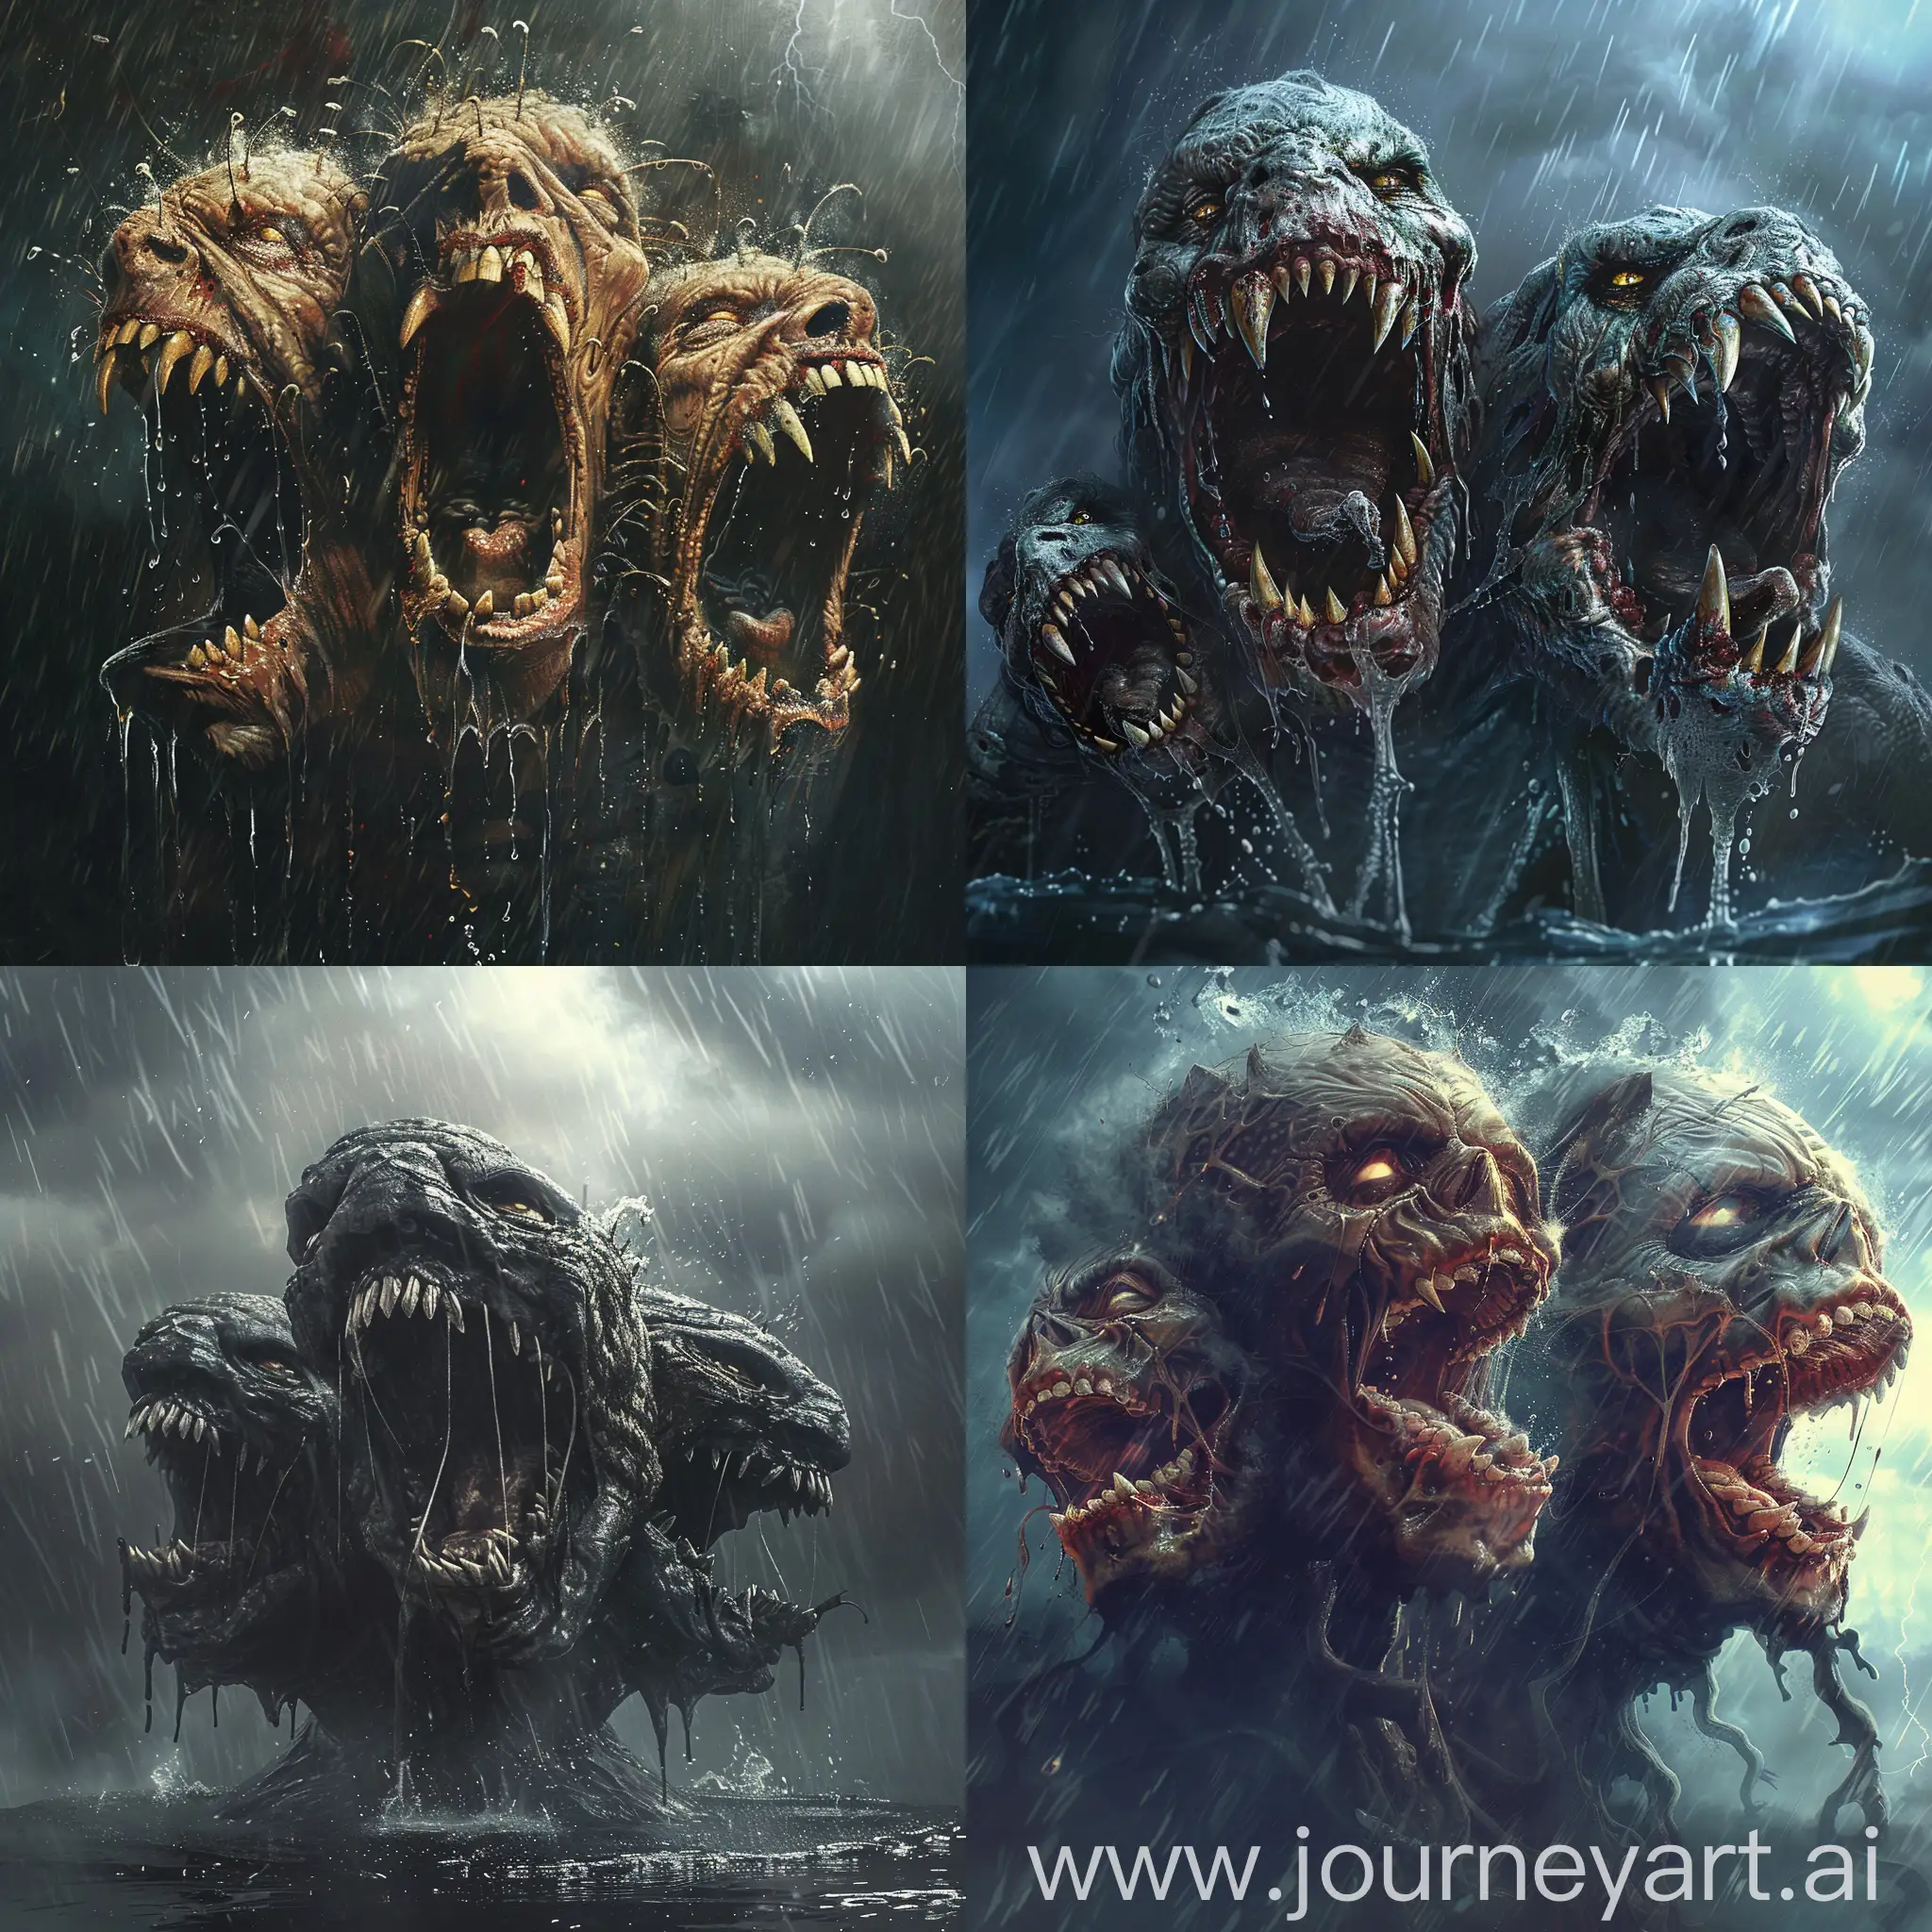 ThreeHeaded-Angry-Monster-with-Sharp-Teeth-on-Rainy-Cliff-at-Night